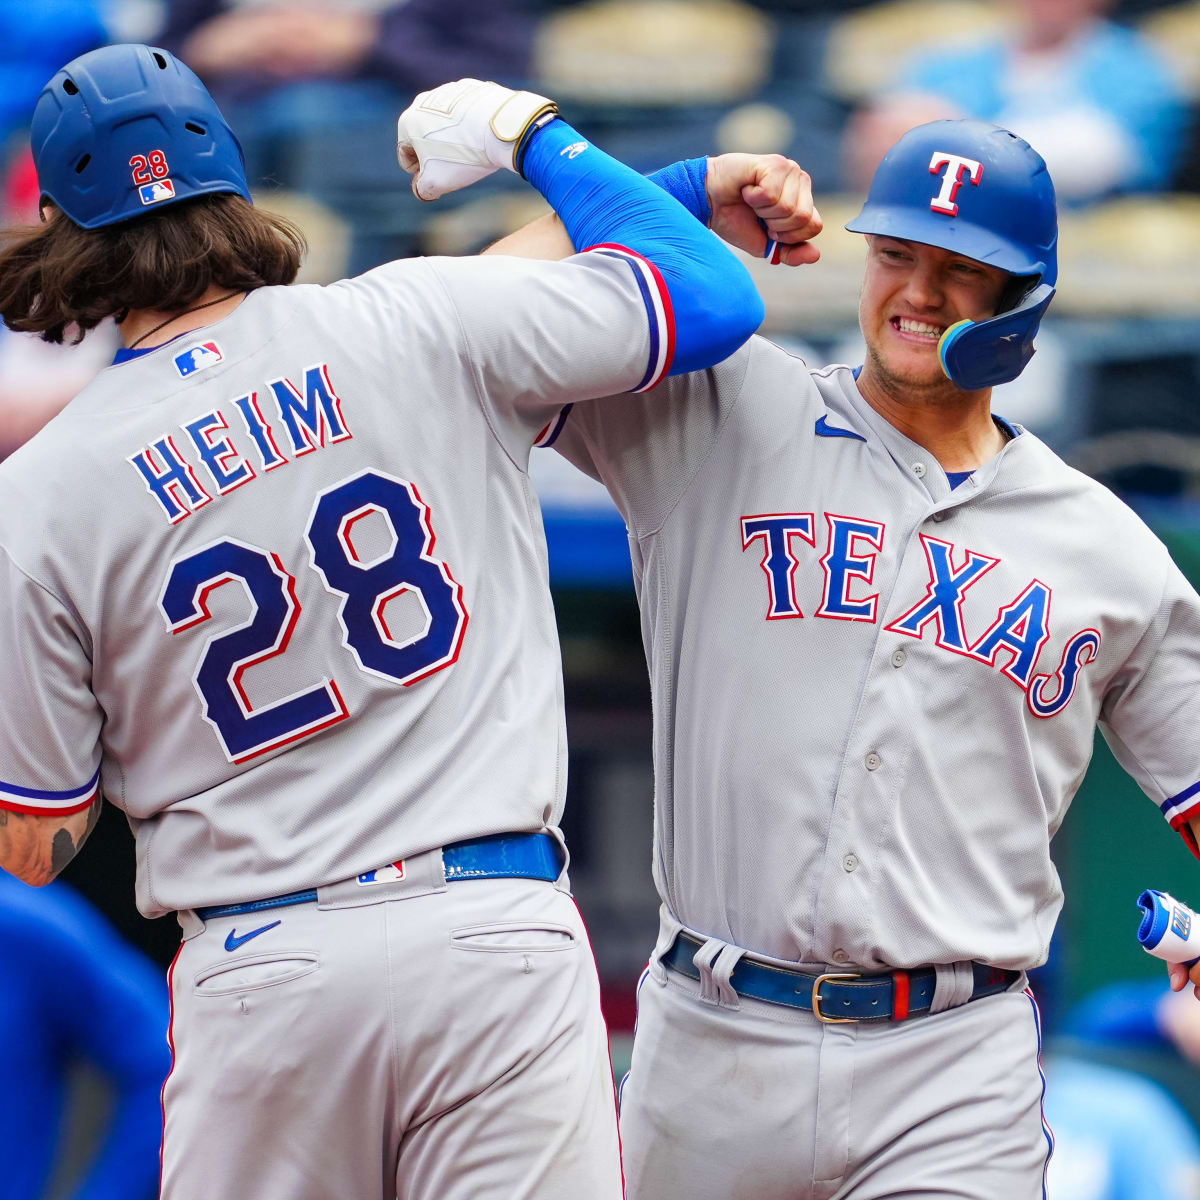 Heim Time' Behind Plate For Texas Rangers - Sports Illustrated